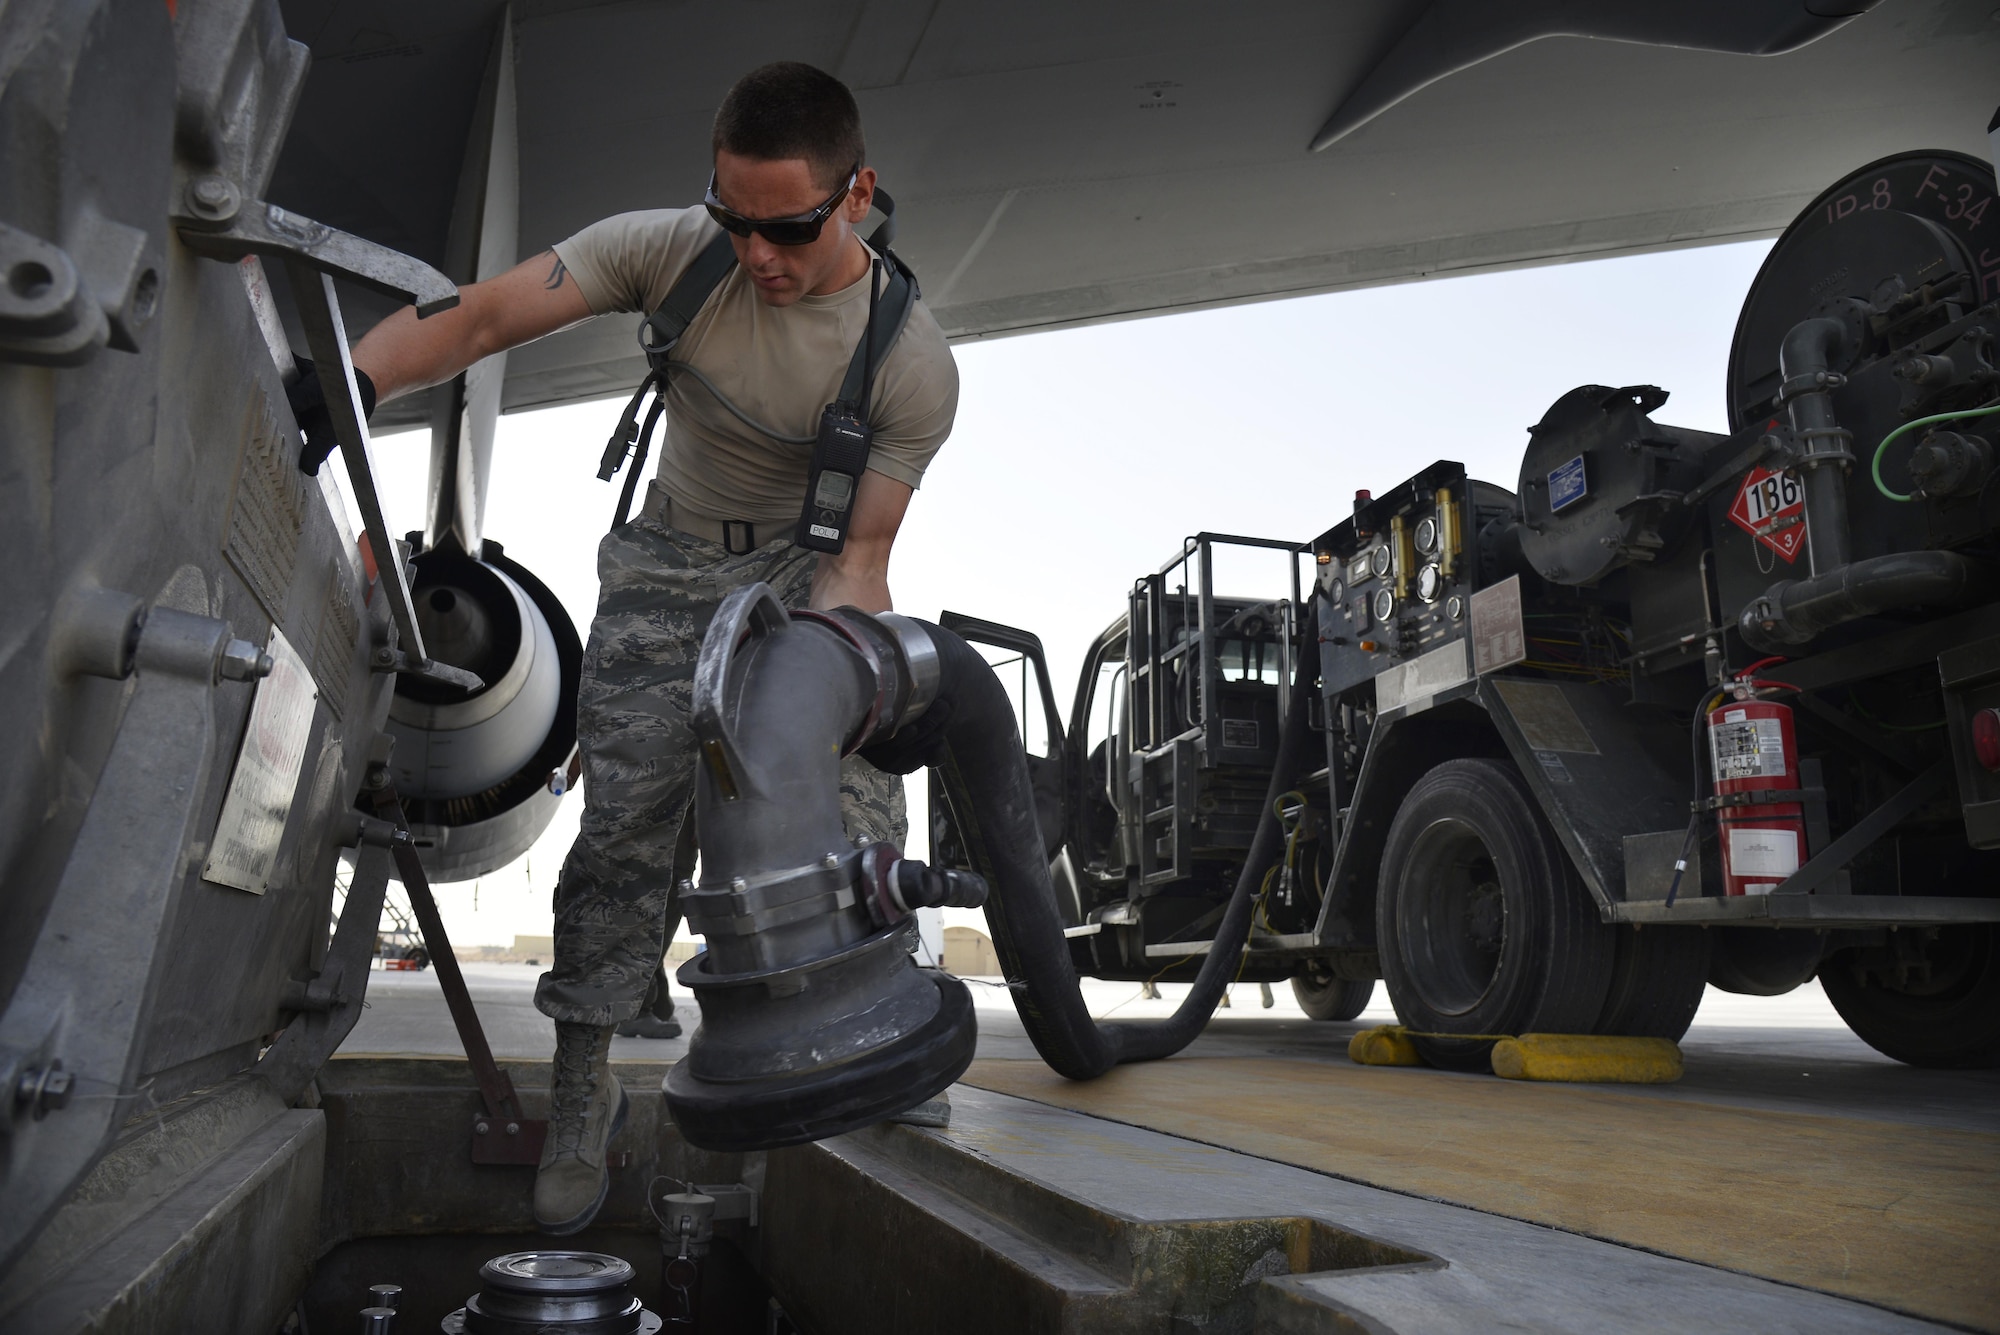 Airman 1st Class Arnaldo connects an R-12 refueling vehicle nozzle to a hydrant system to refuel a KC-10 Extender at an undisclosed location in Southwest Asia May 18, 2015. The R-12 refueling vehicle draws fuel from an underground hydrant system and pushes it to aircraft. Airman Arnaldo is a fuels distribution operator assigned to the Expeditionary Logistics Readiness Squadron. Due to safety and security reasons, last names and unit designators were removed. (U.S. Air Force photo/Tech. Sgt. Christopher Boitz) 